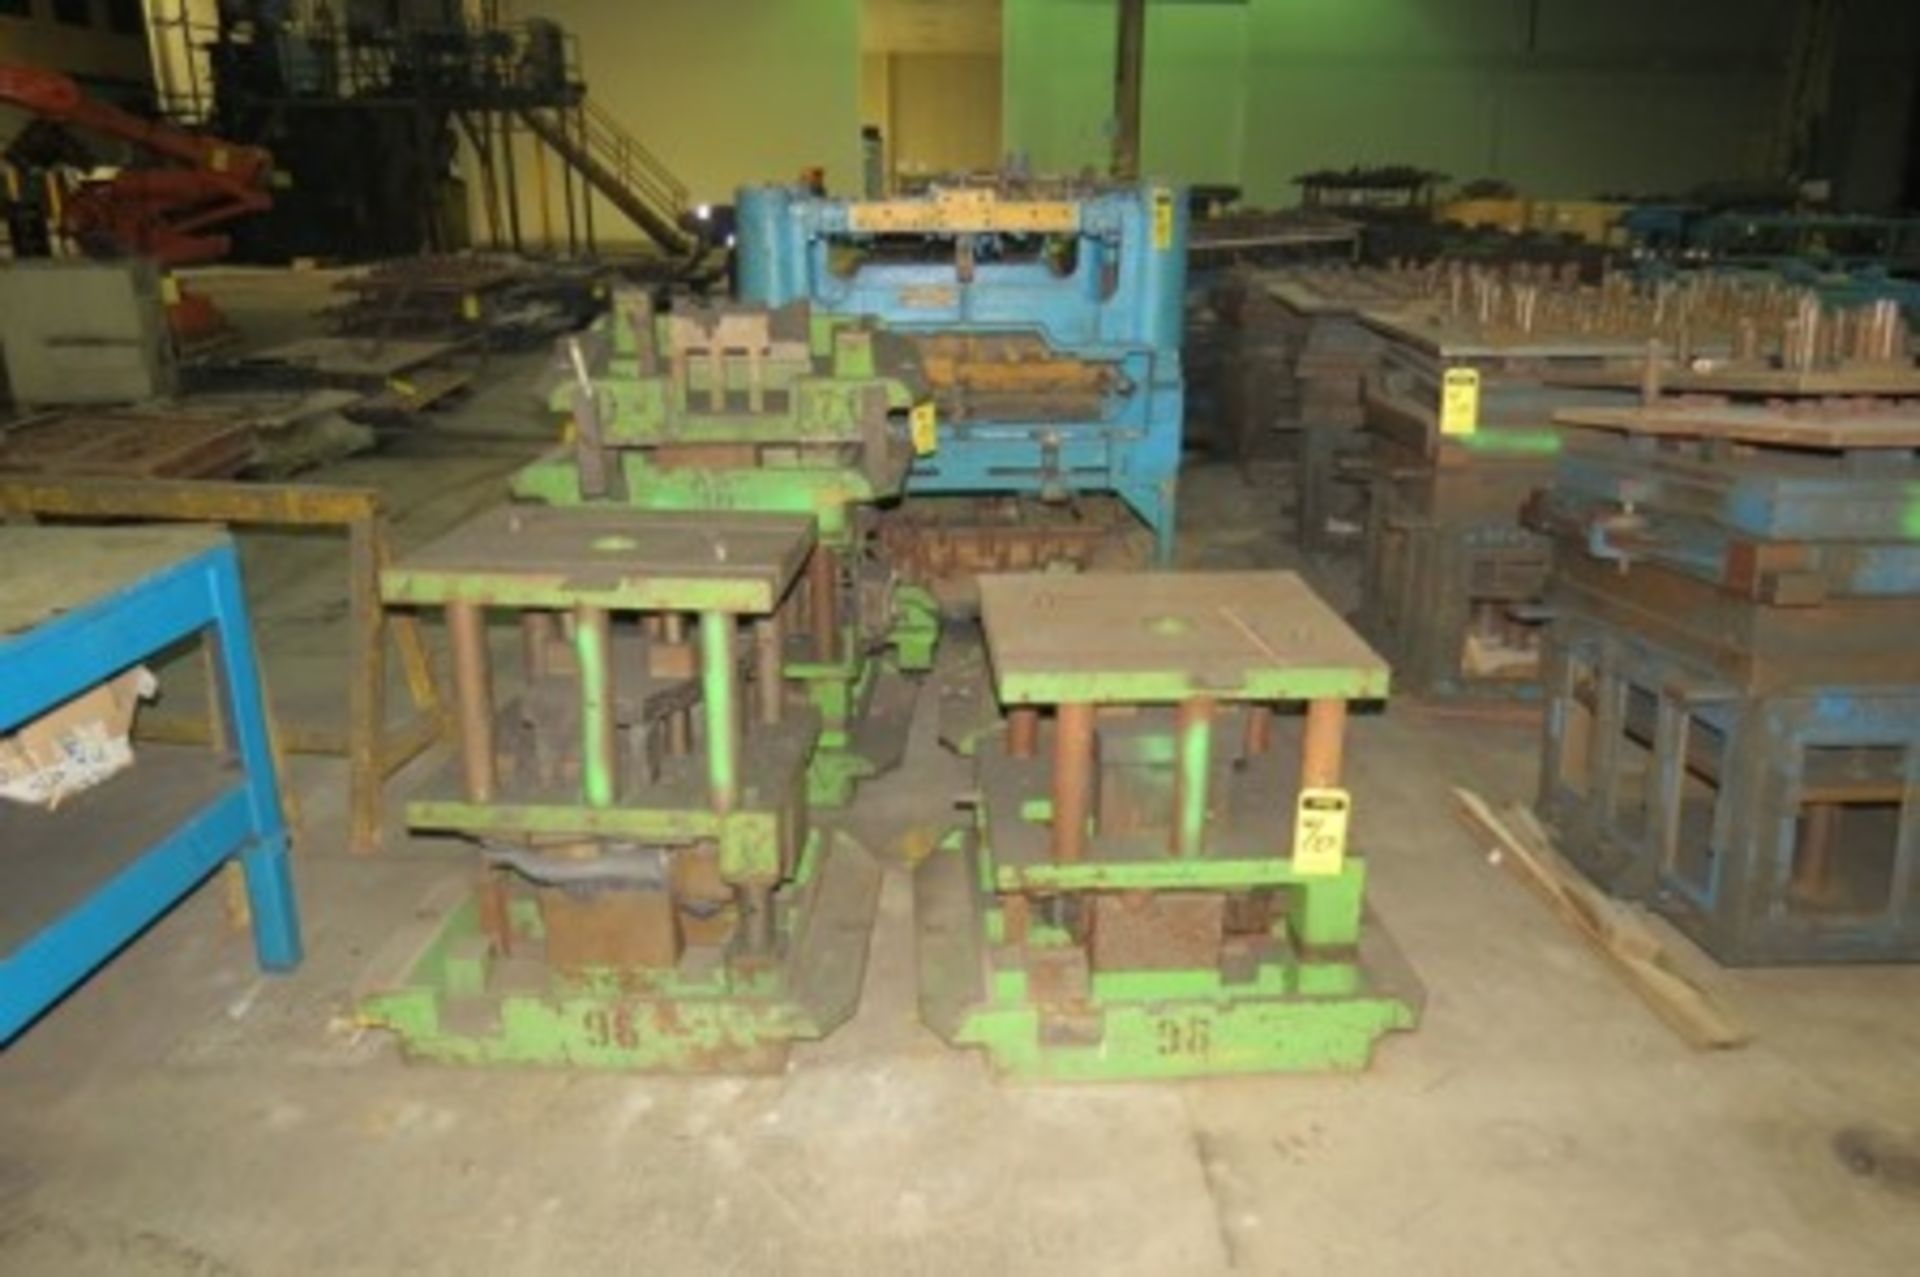 (12) Die casting molds